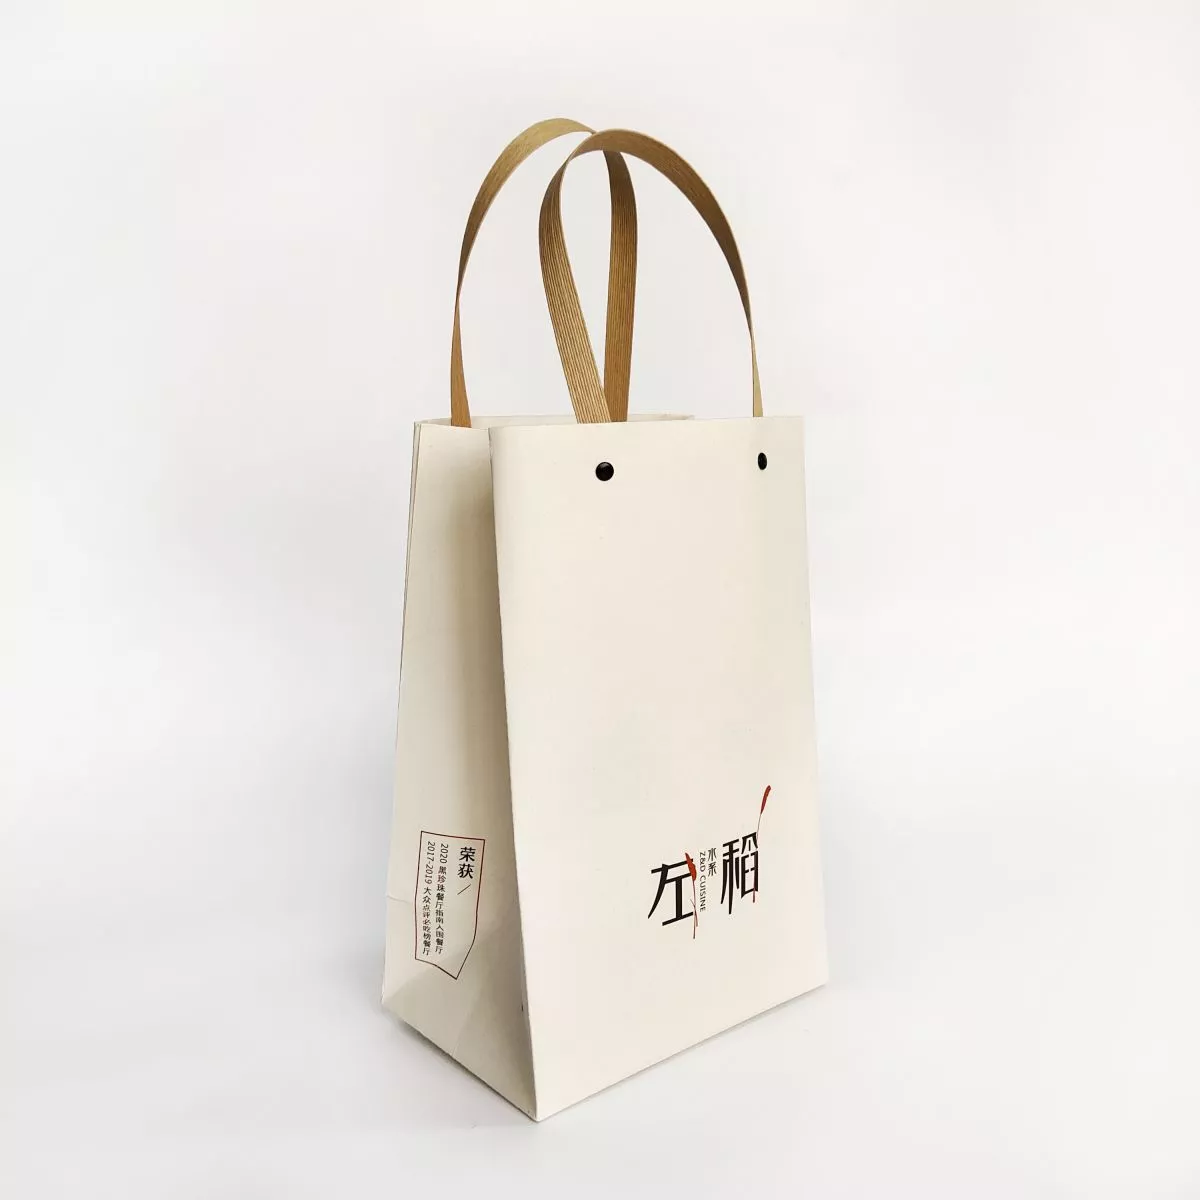 Beige paper shopping bags with handles